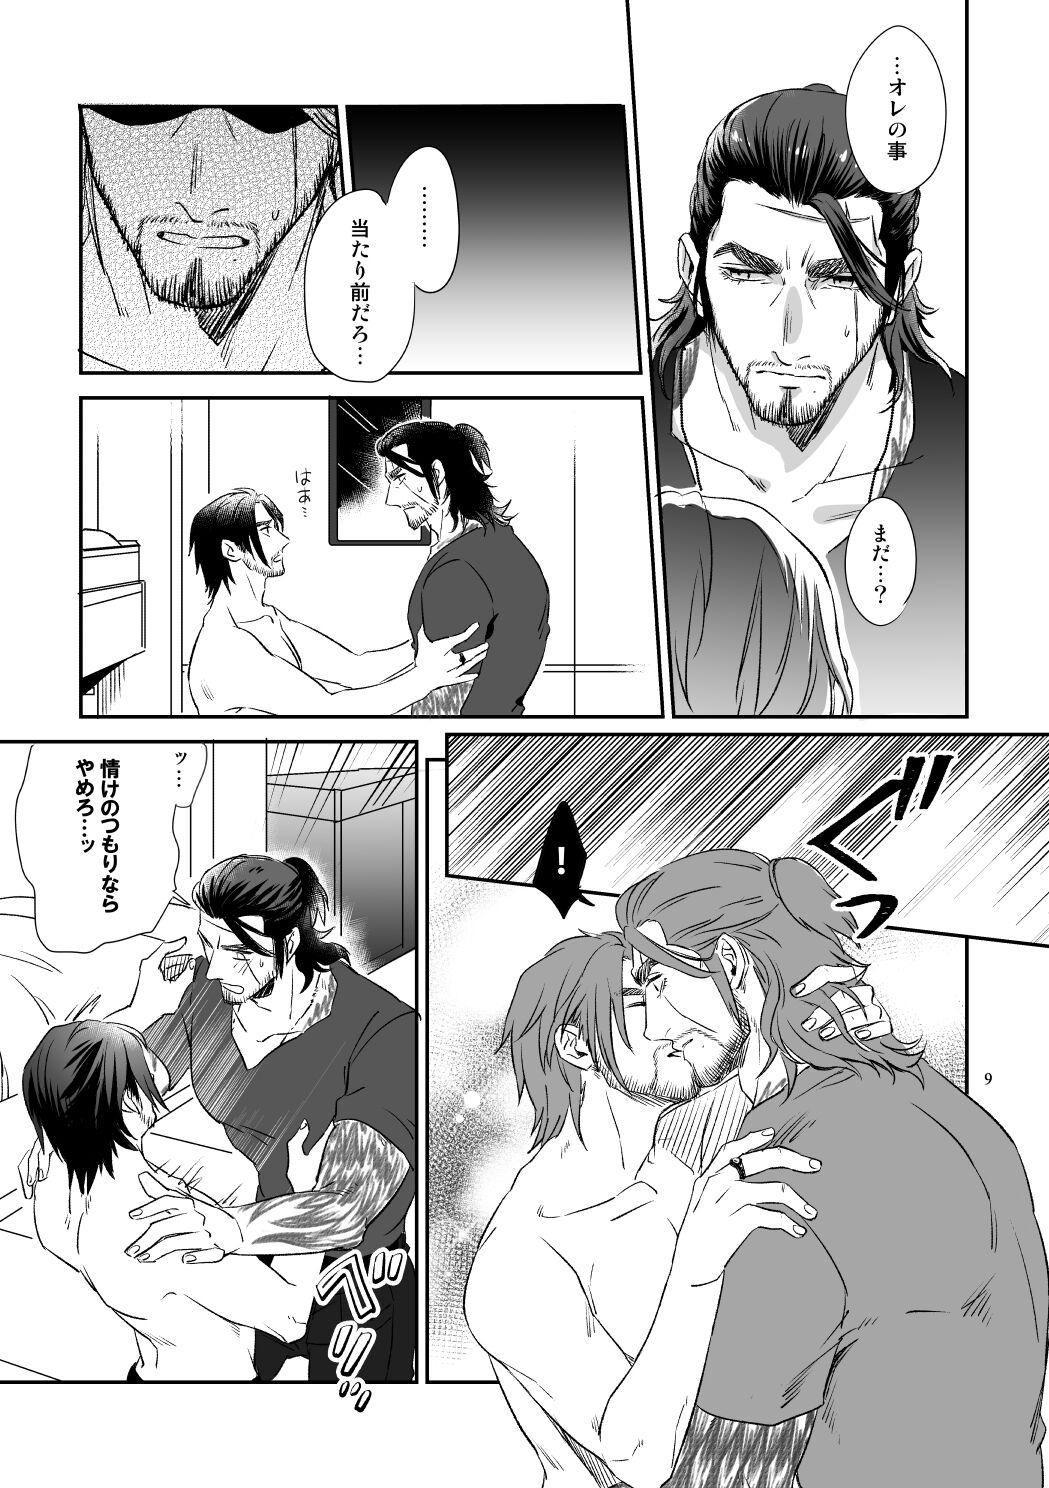 Lovers Bright Road - Final fantasy xv Forwomen - Page 7